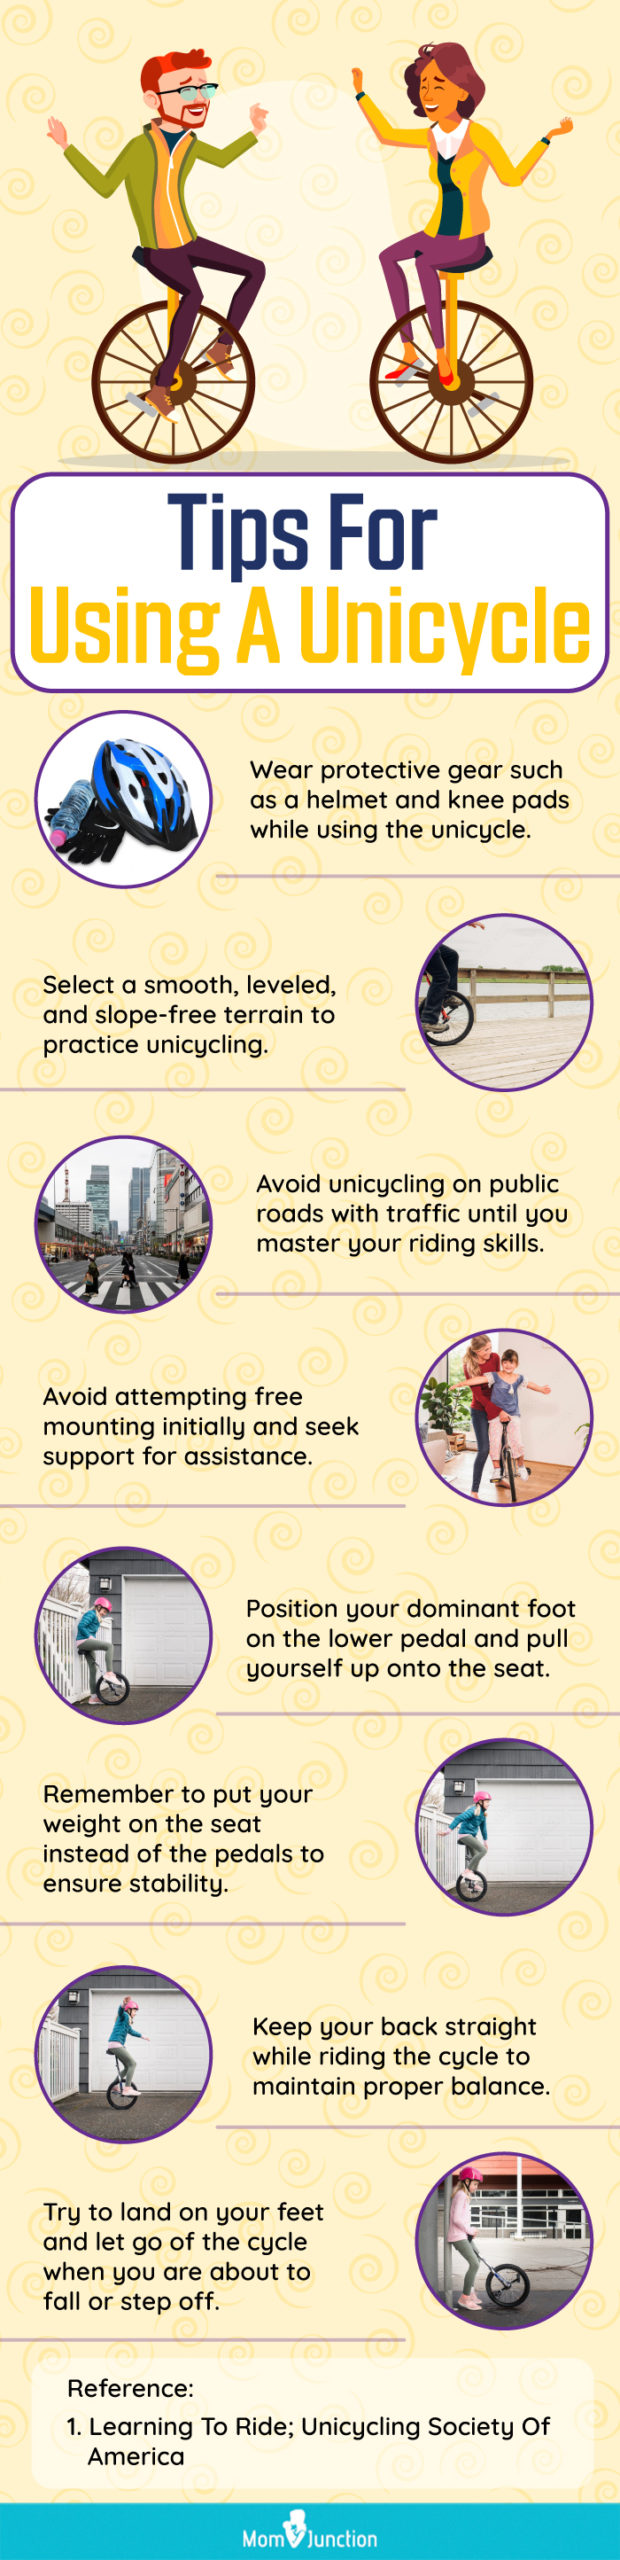 Tips For Using A Unicycle (infographic)